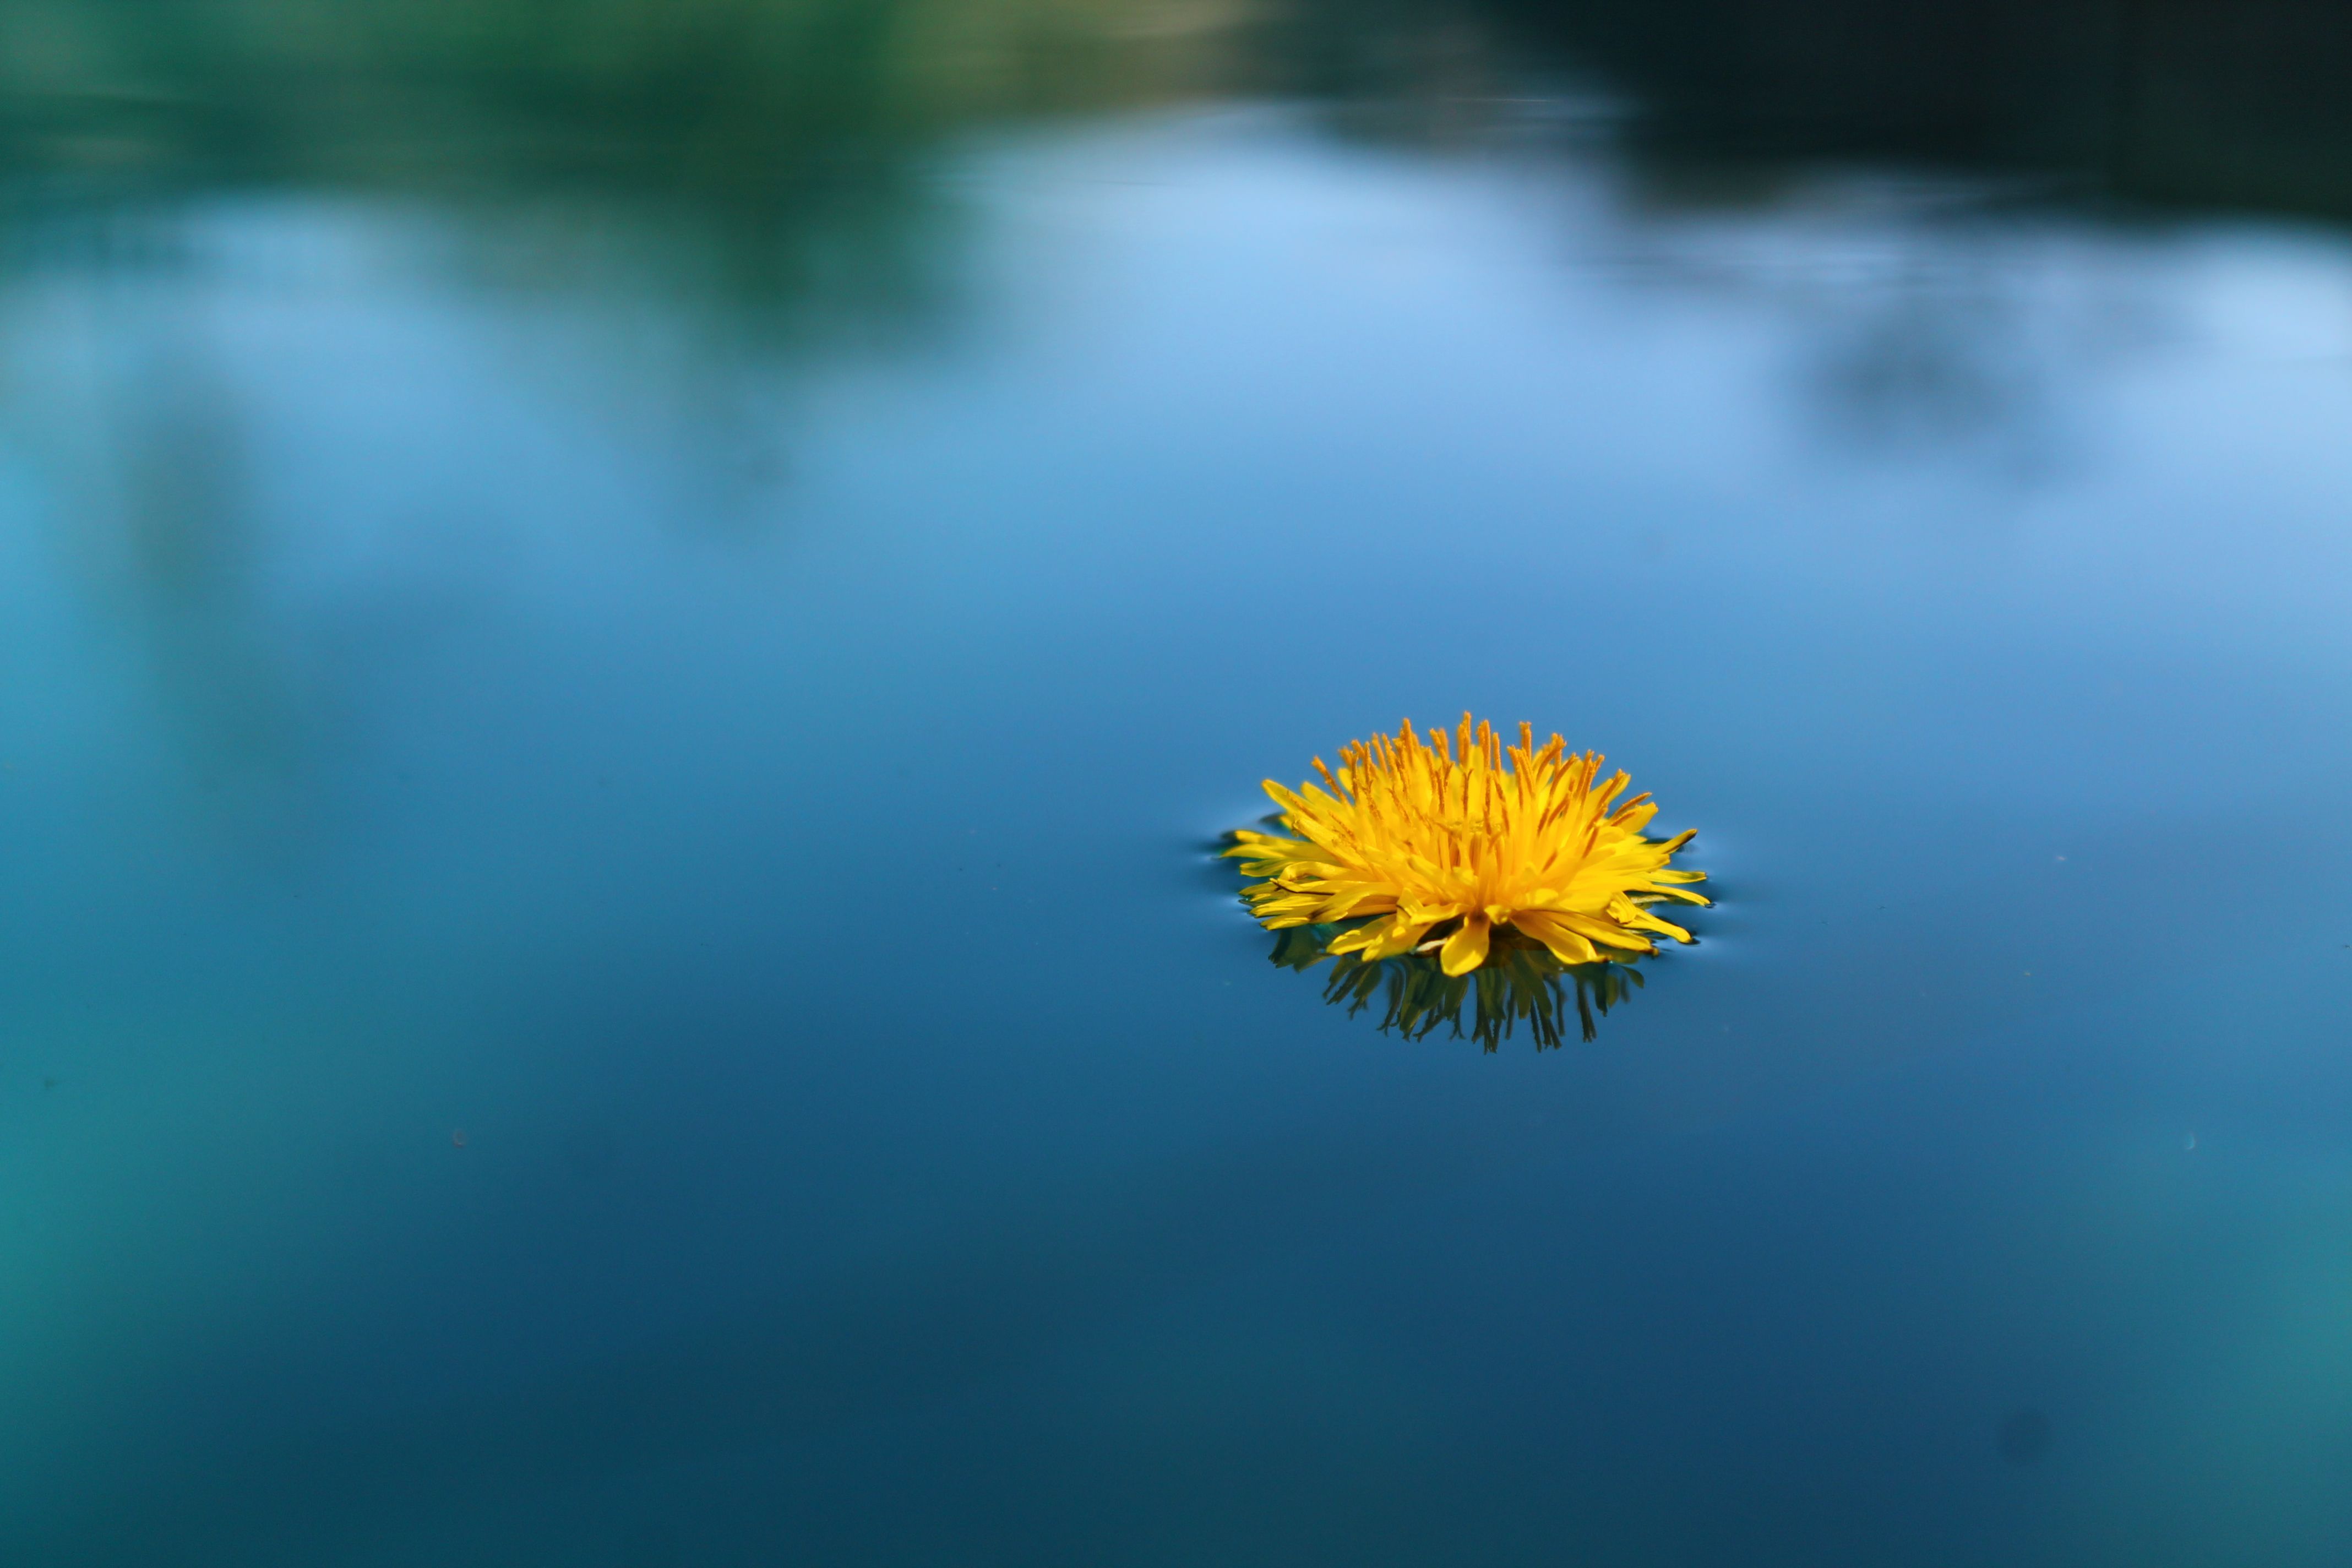 Wallpaper, blue, shadow, summer, flower, color, reflection, green, water, colors, pool, yellow, reflections, outside, weed, colorful, Texas, shadows, bokeh, floating, dandelion, float 4272x2848